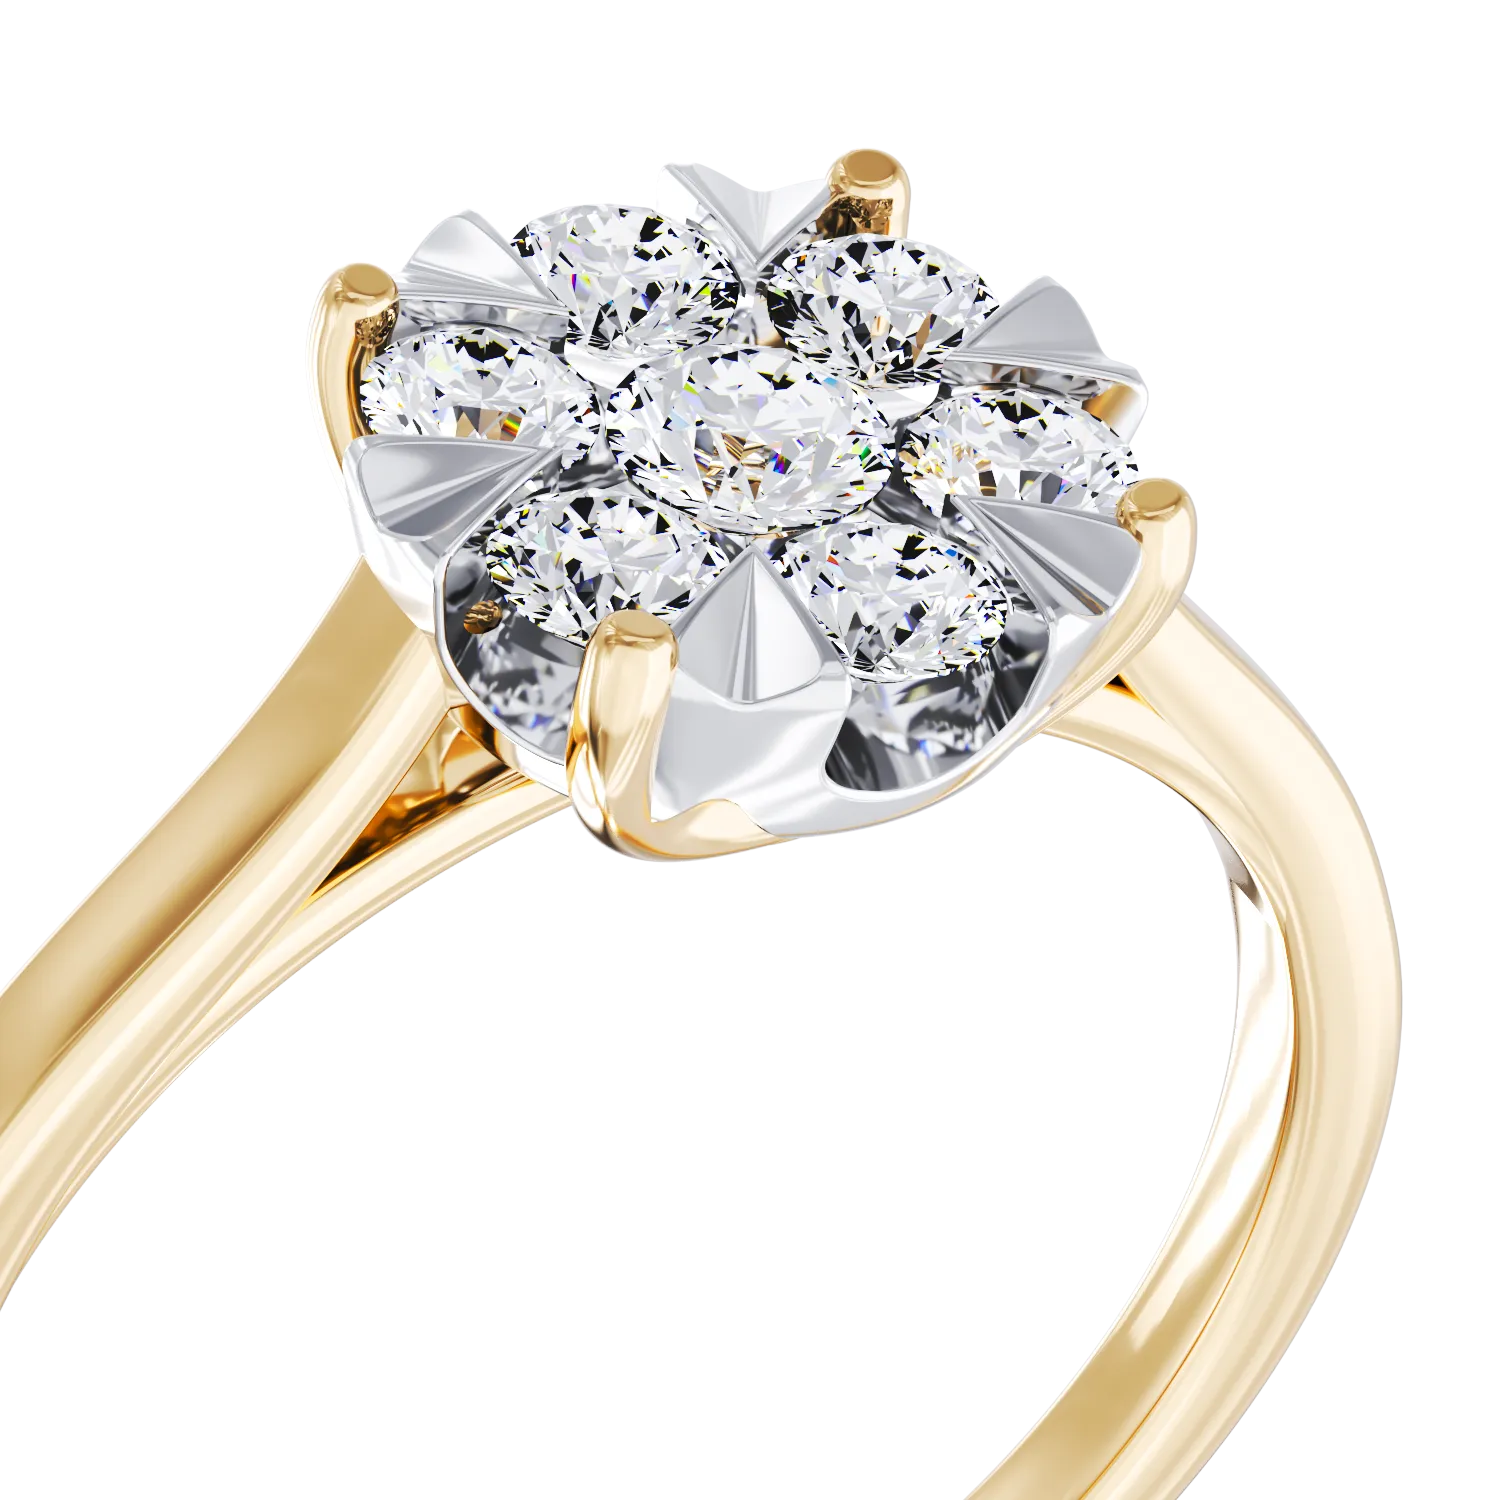 Yellow gold engagement ring with 0.35ct diamonds